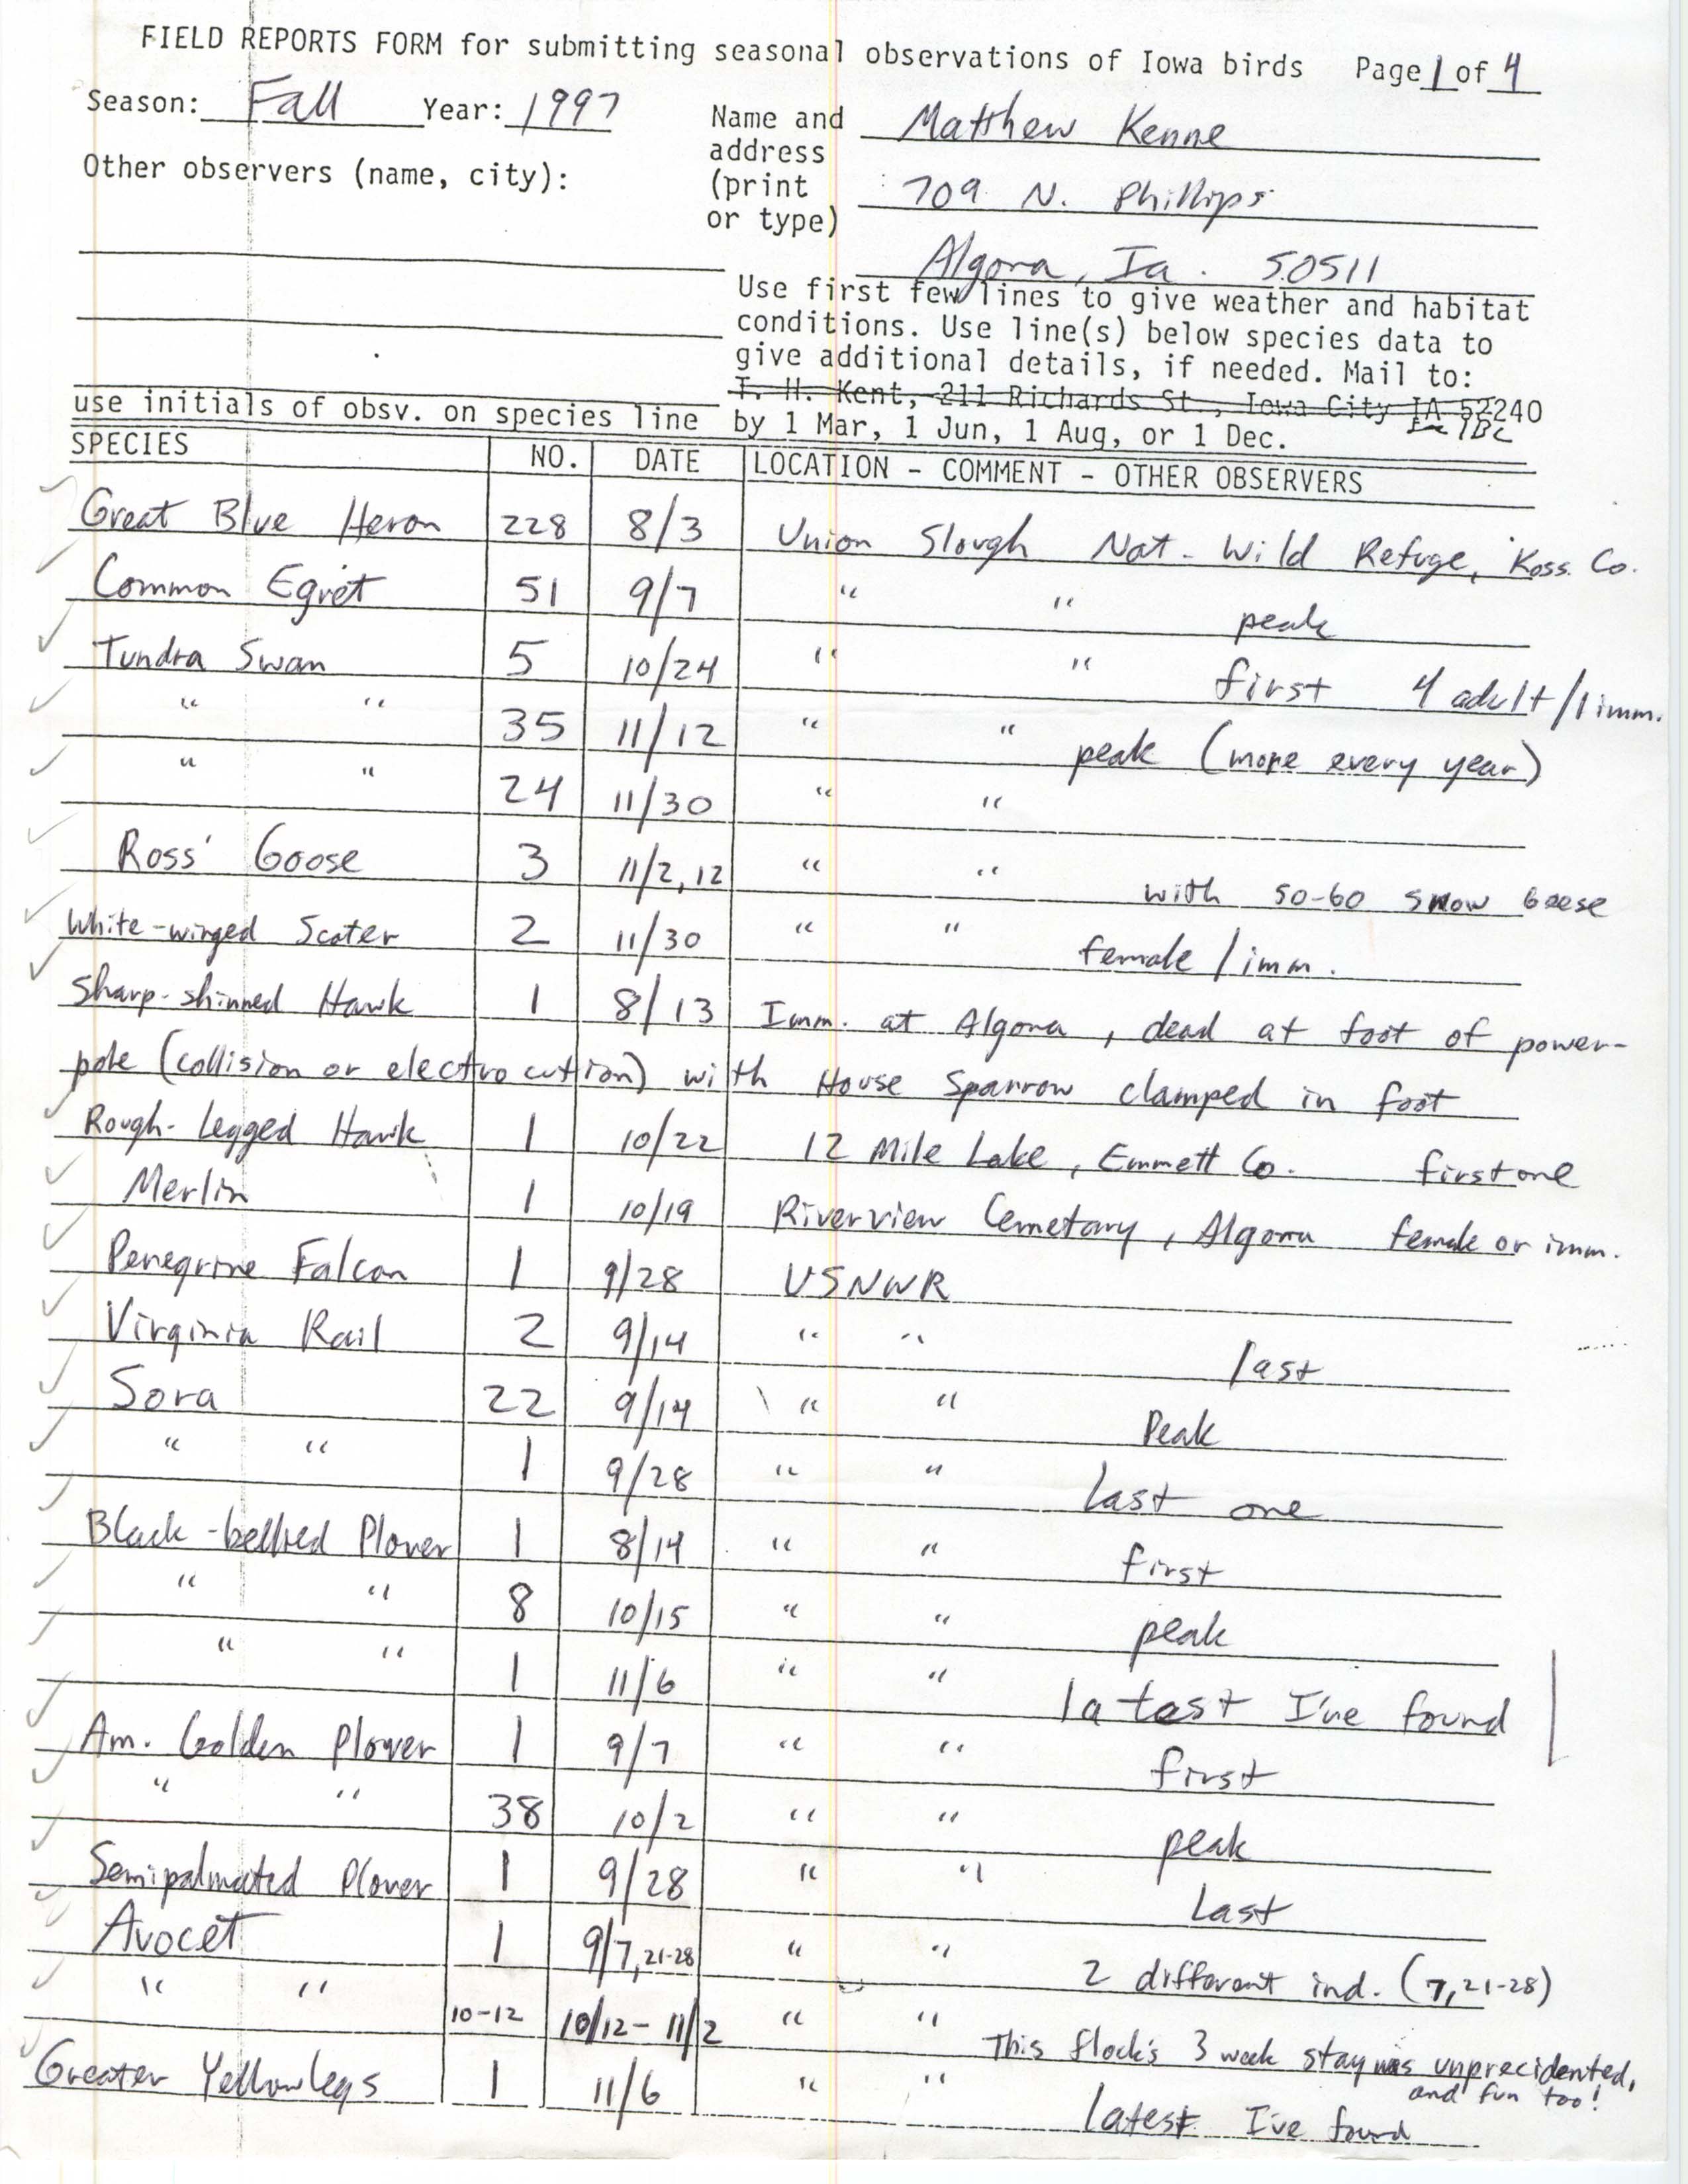 Field reports form for submitting seasonal observations of Iowa birds, Matthew Kenne, fall 1997